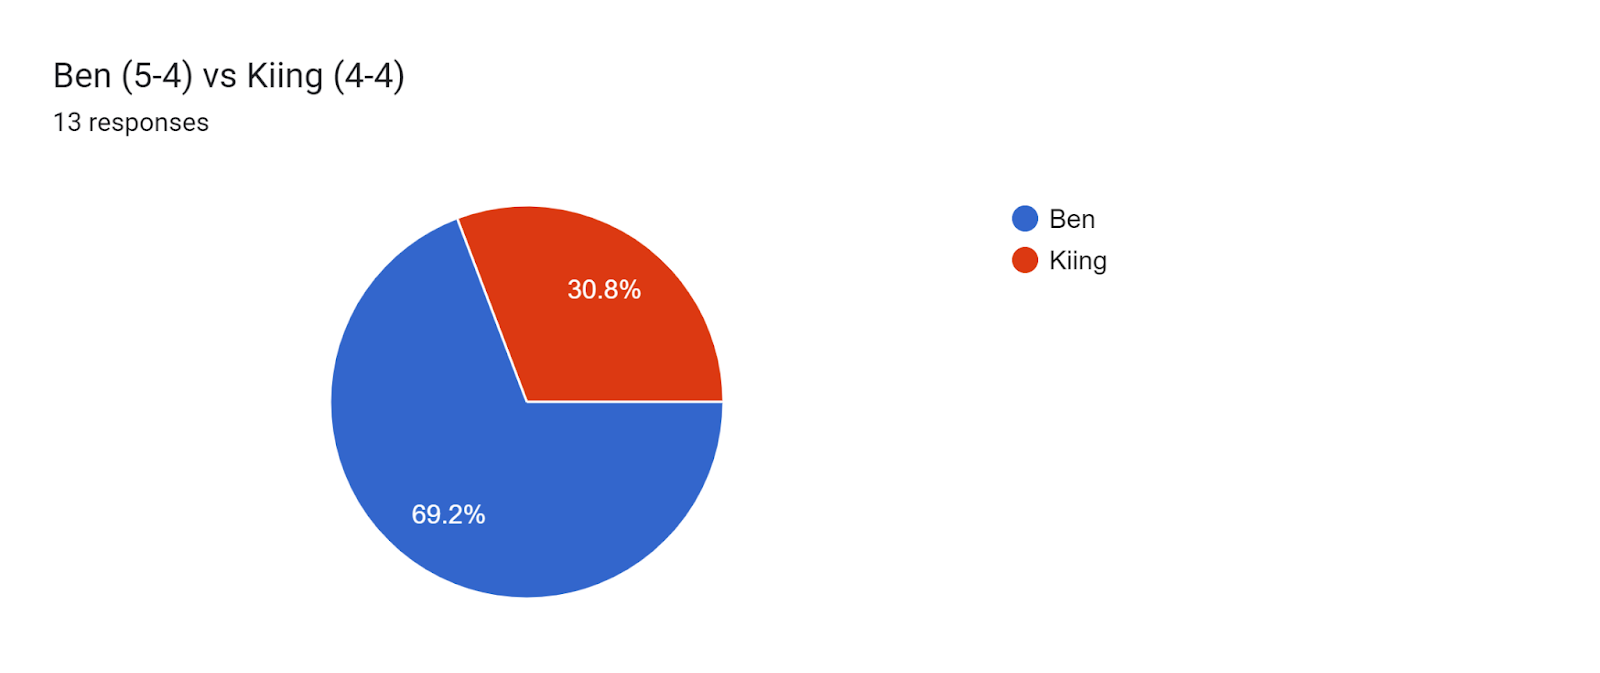 Forms response chart. Question title: Ben (5-4) vs Kiing (4-4). Number of responses: 13 responses.